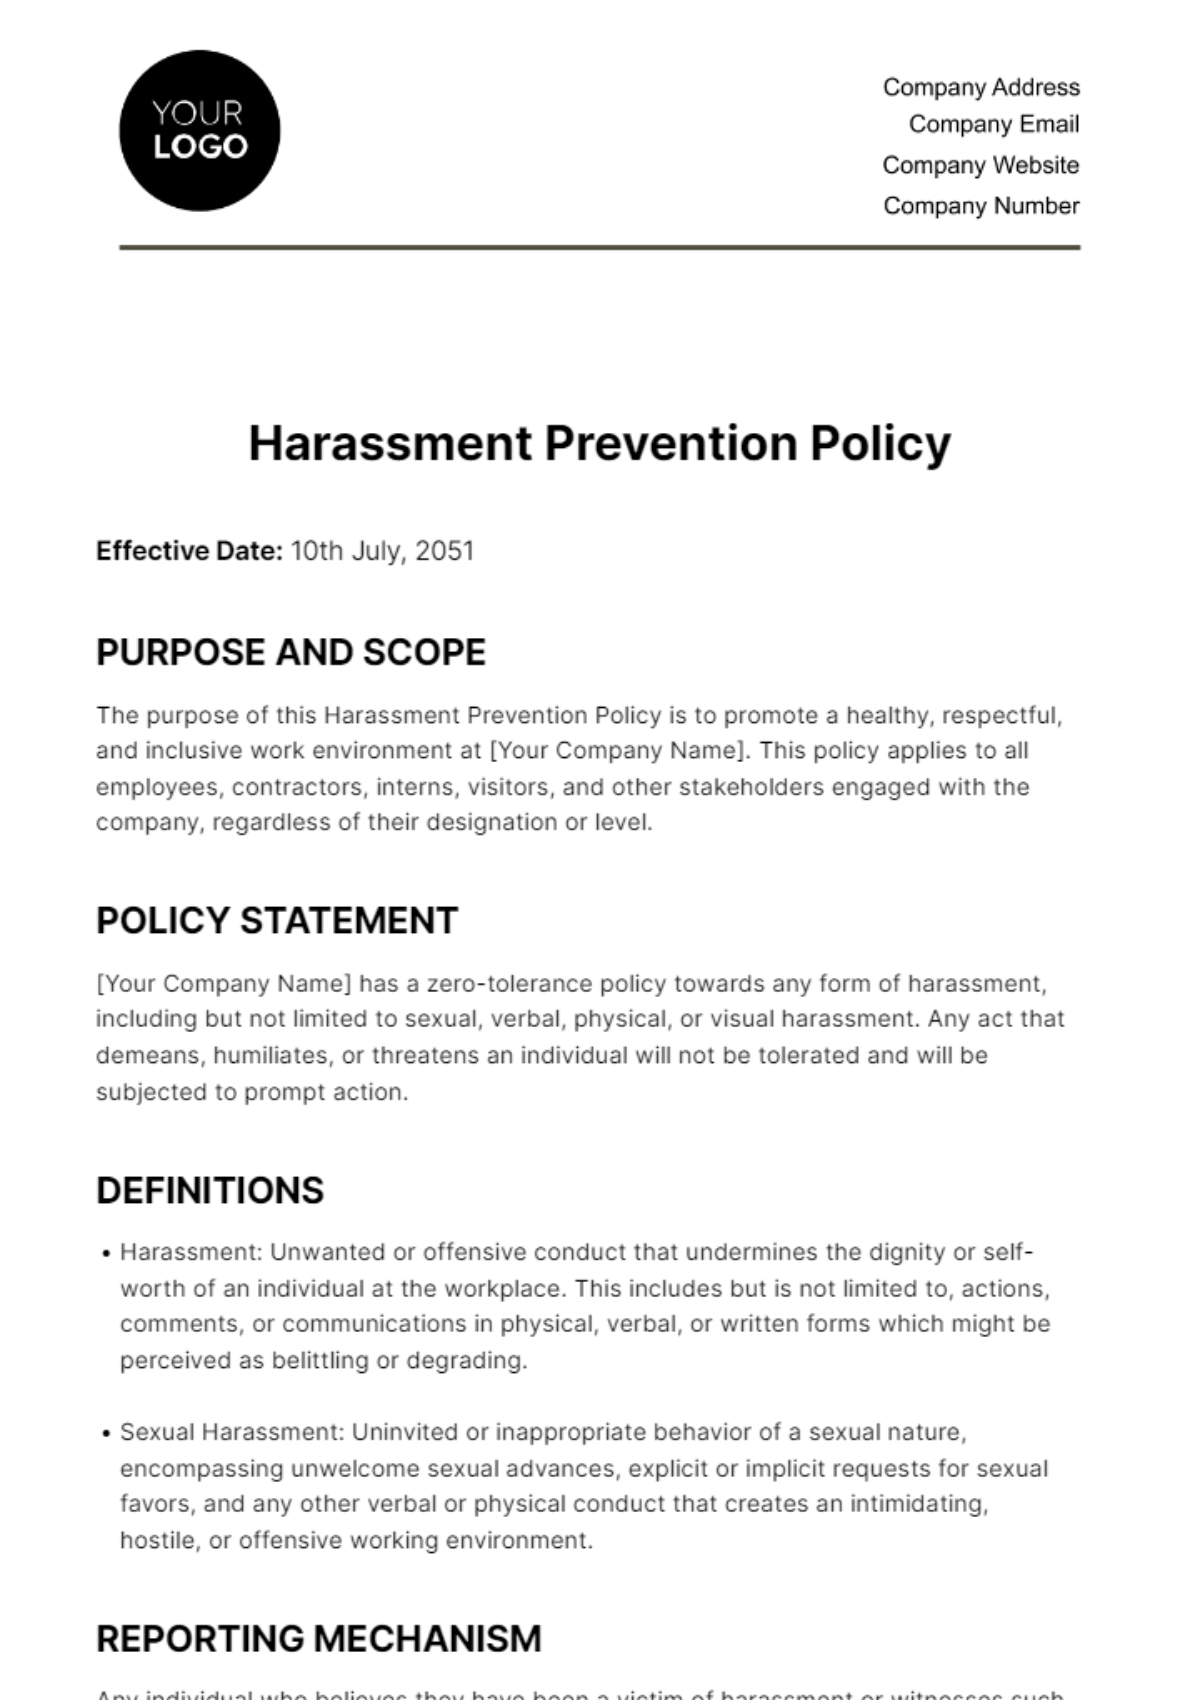 Free Harassment Prevention Policy HR Template